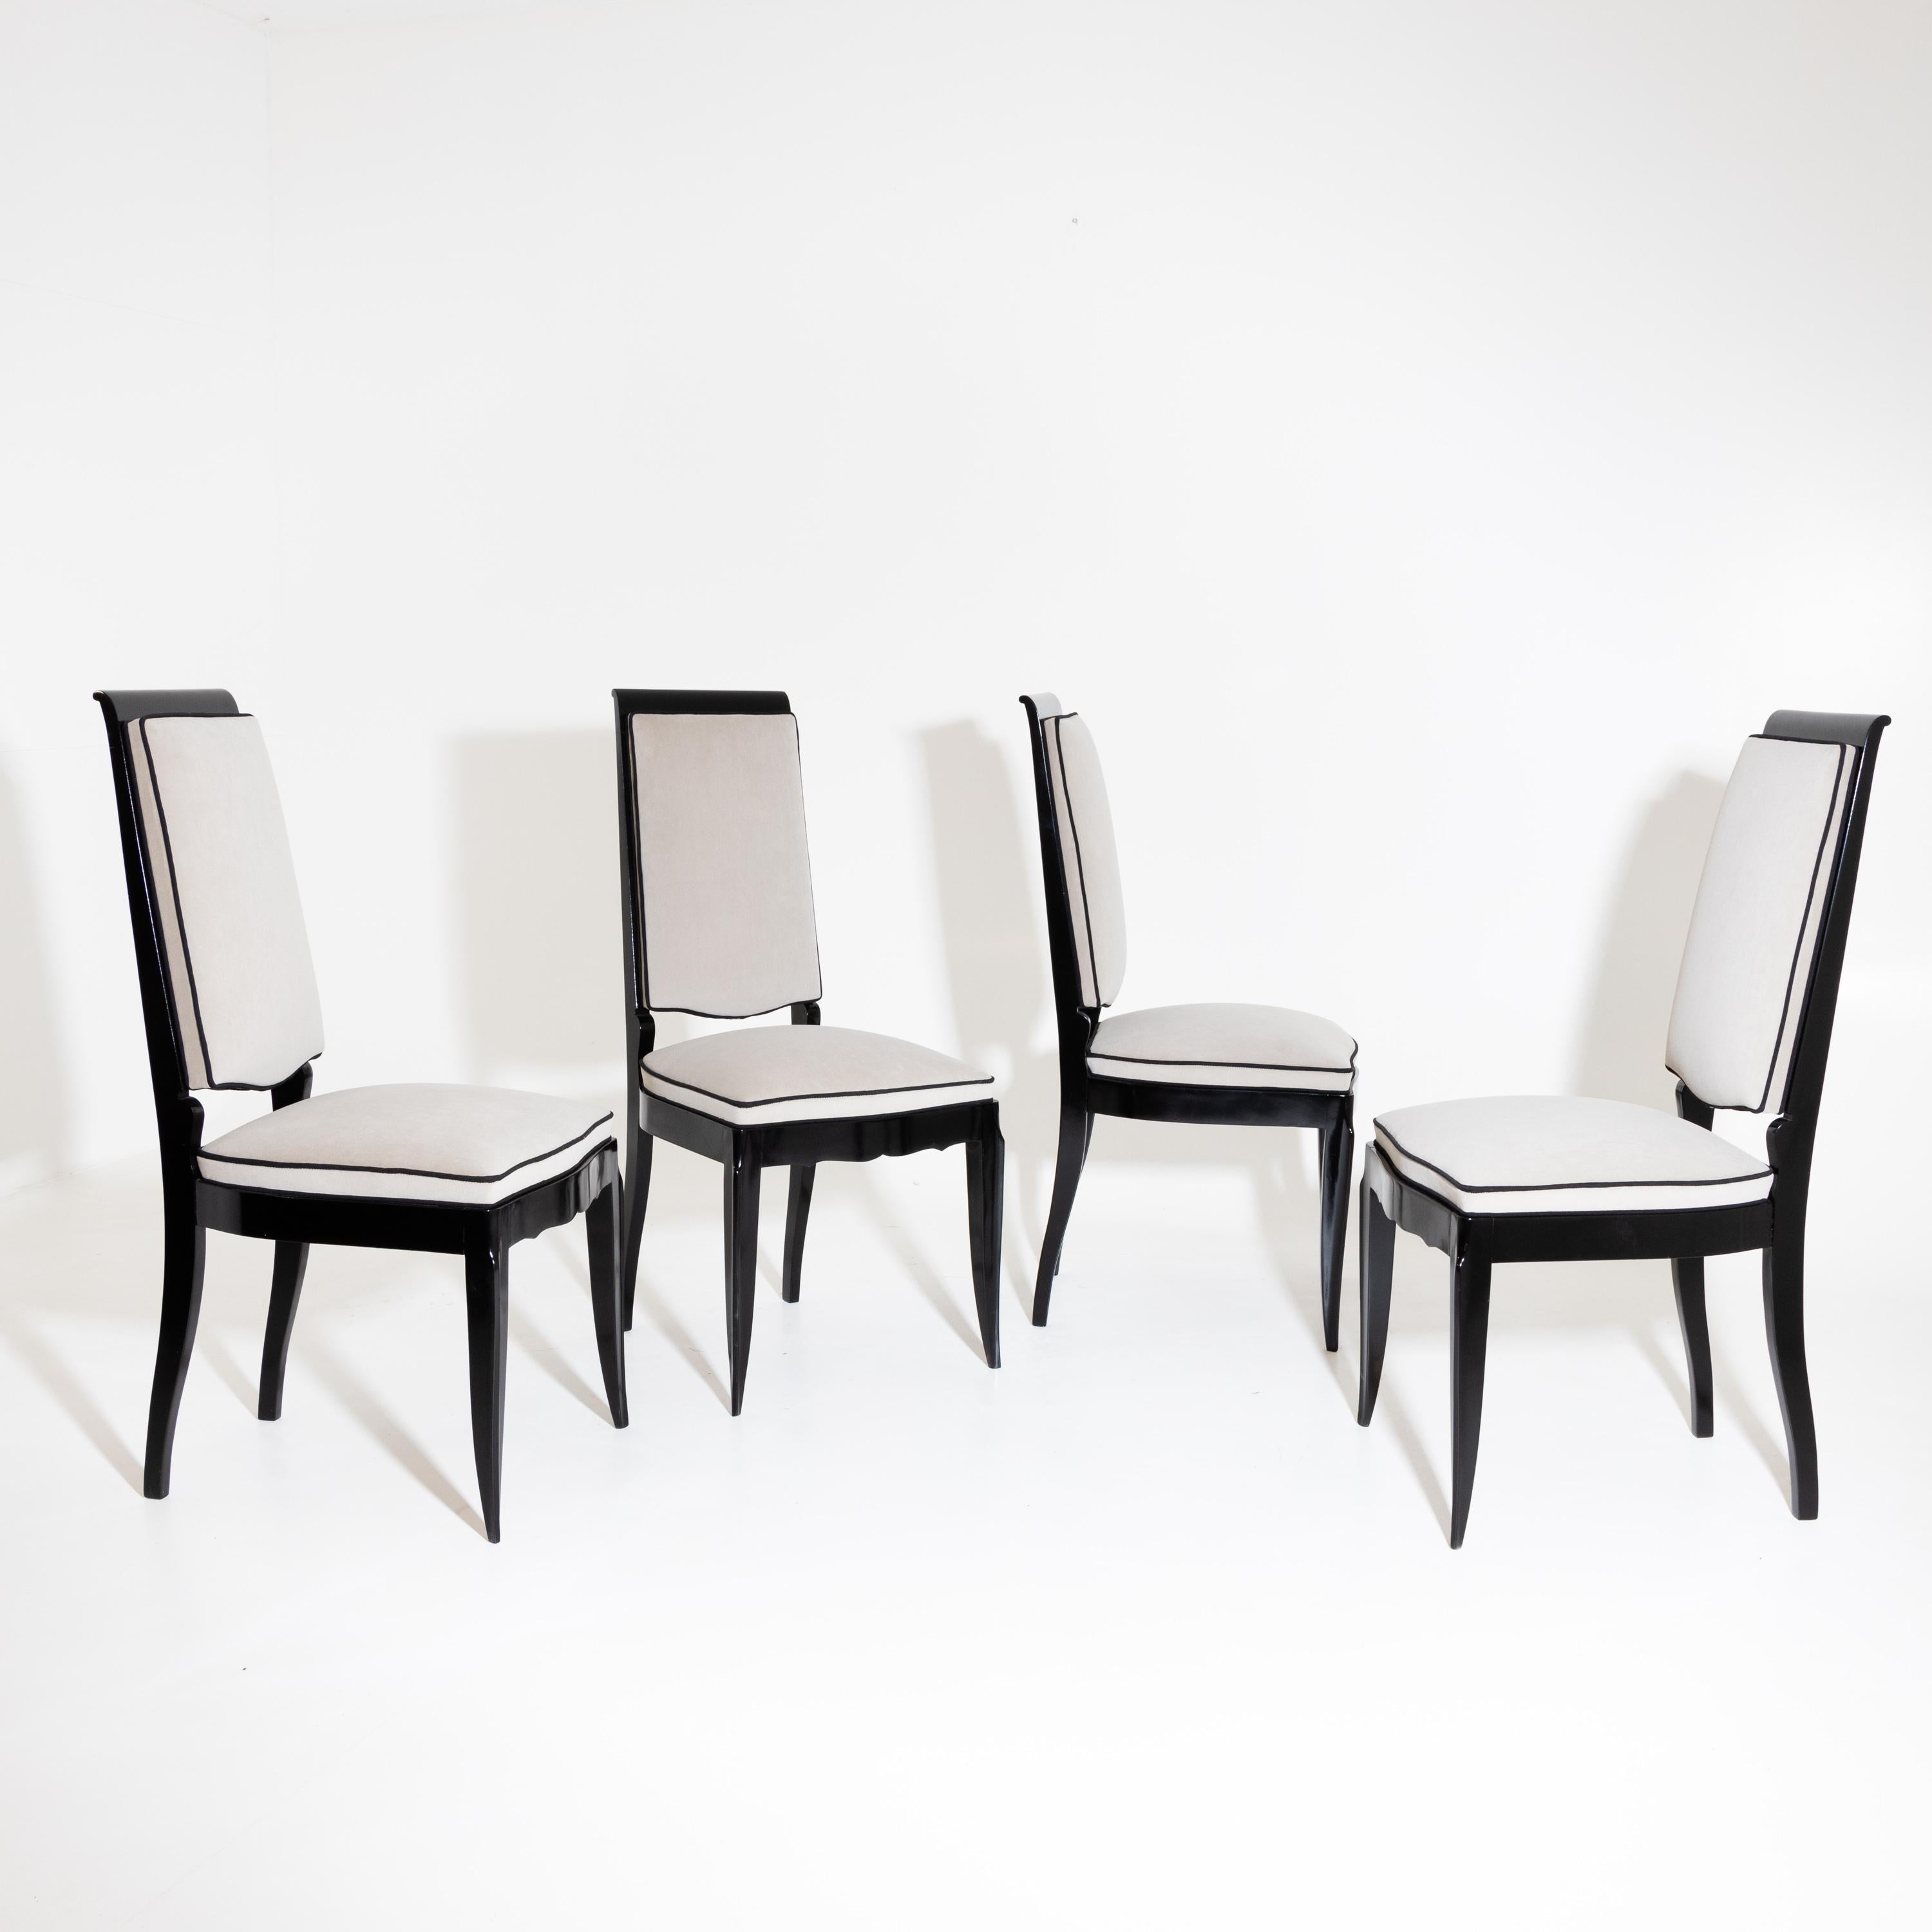 Early 20th Century Set of Six Art Deco Dining Room Chairs, France, 1920s